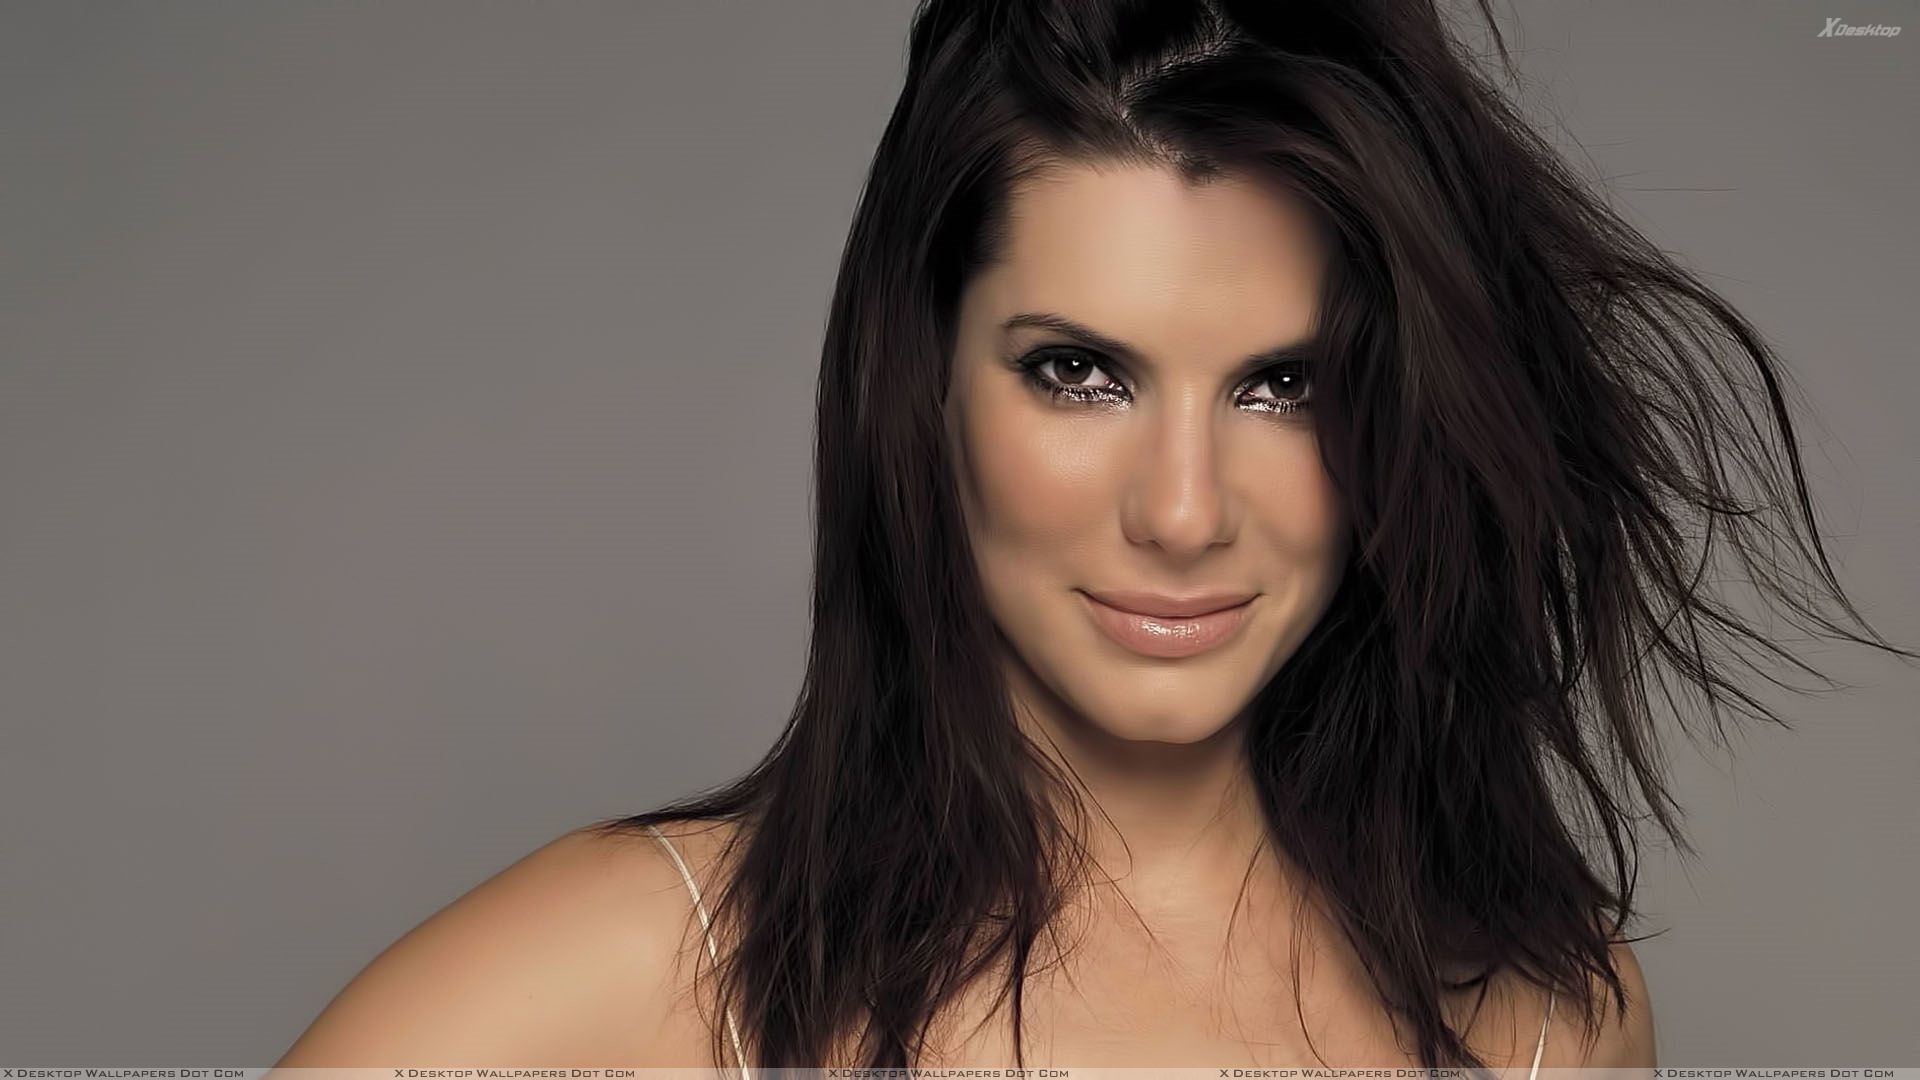 1920x1080 You are viewing wallpaper titled "Sandra Bullock ...